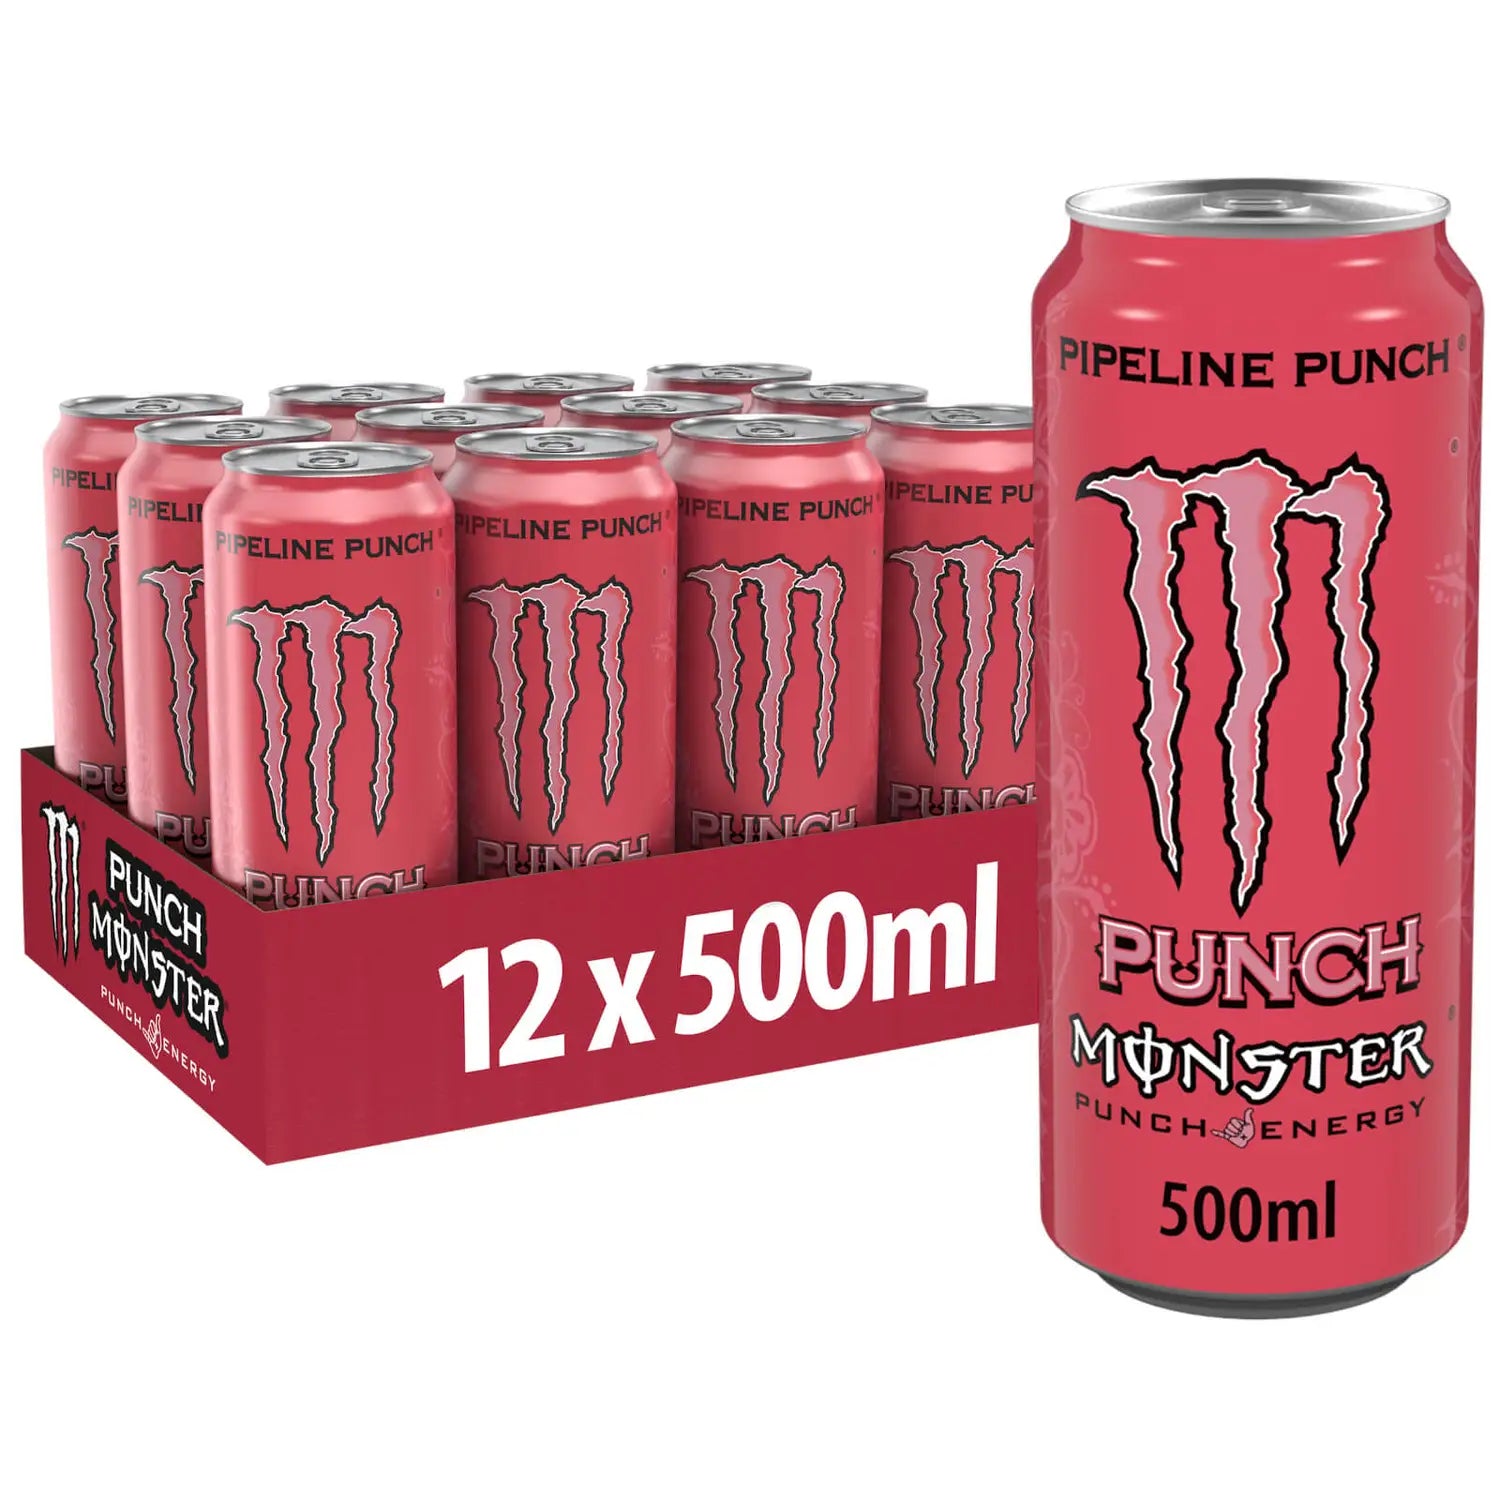 Monster Energy Drink Pipeline Punch 12x500ml (Shipping Restricted)